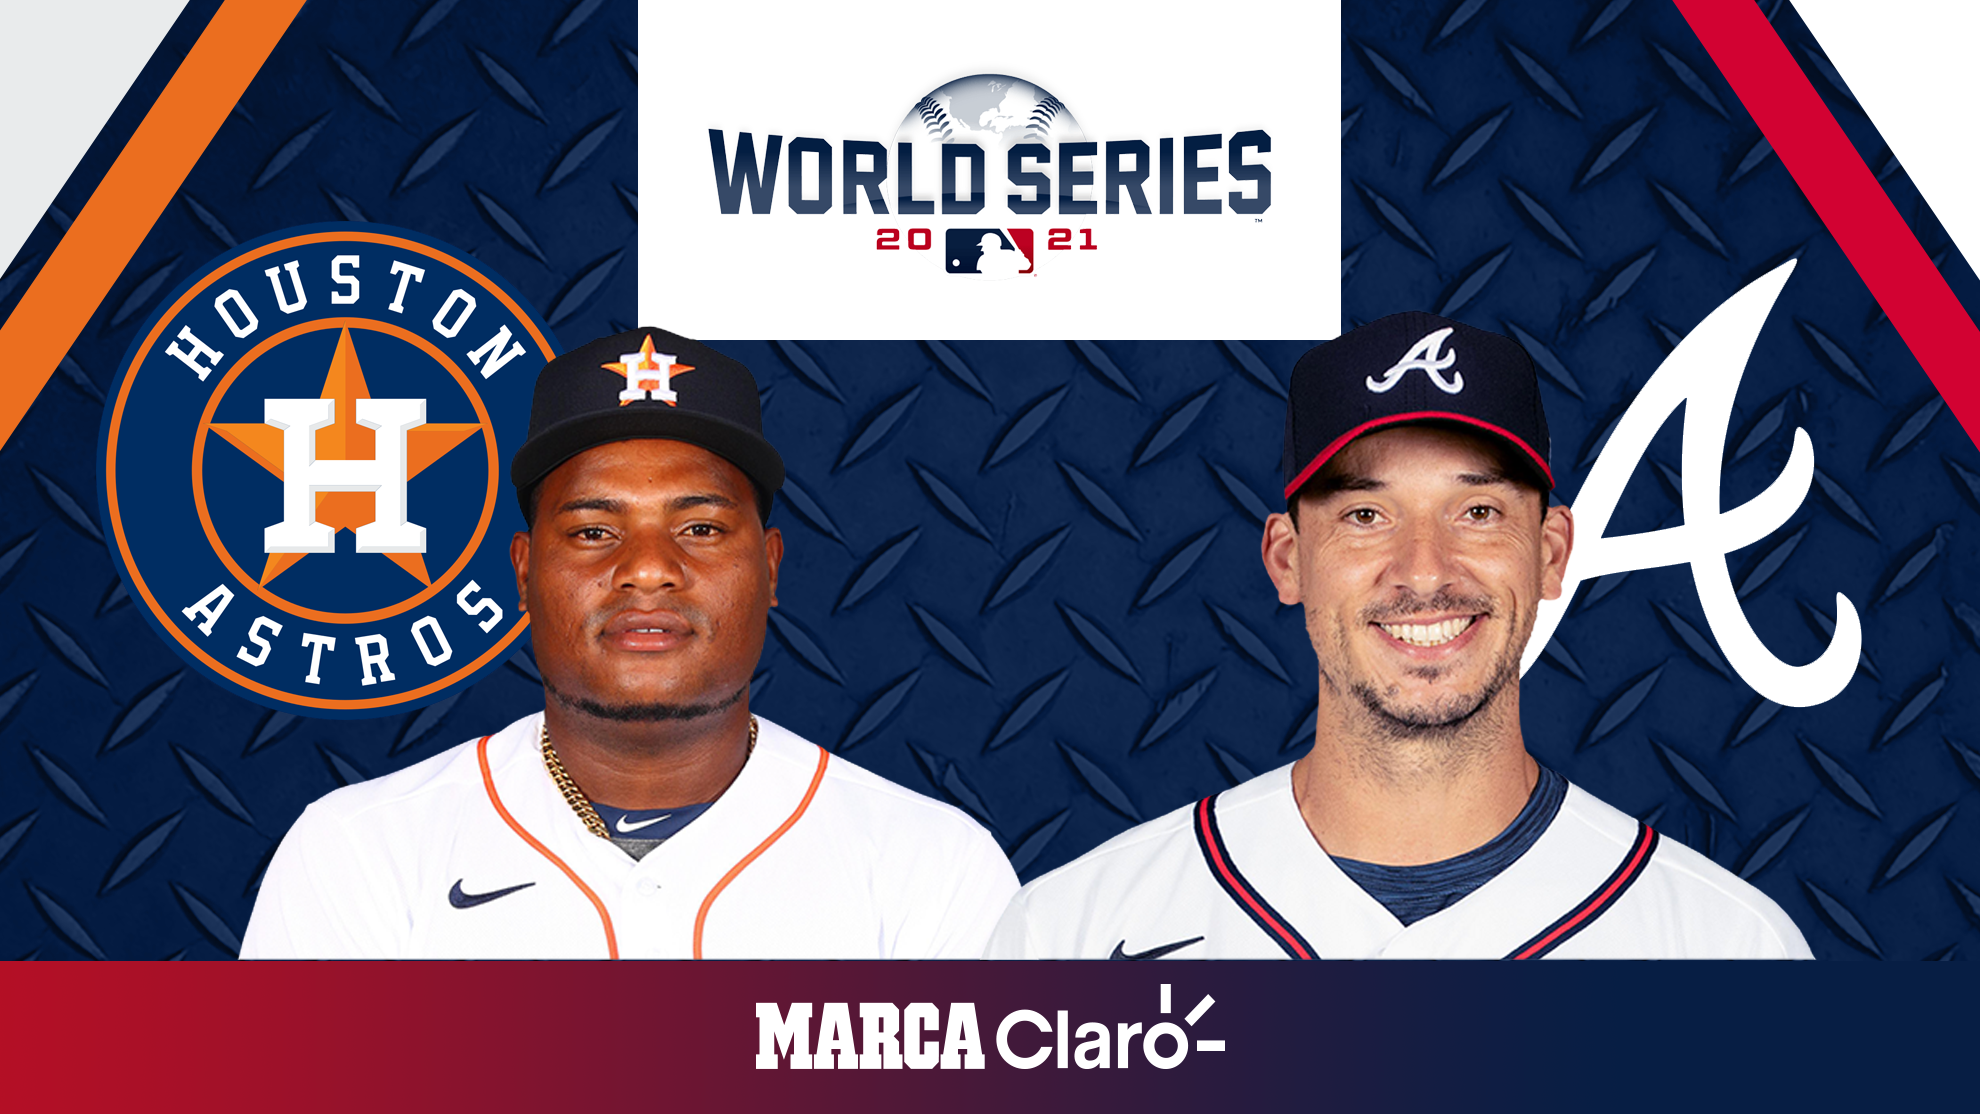 MLB World Series 2021 Live: Braves vs Astros Playoffs MLB 2021: End of Game 1 of the Major League Baseball World Series